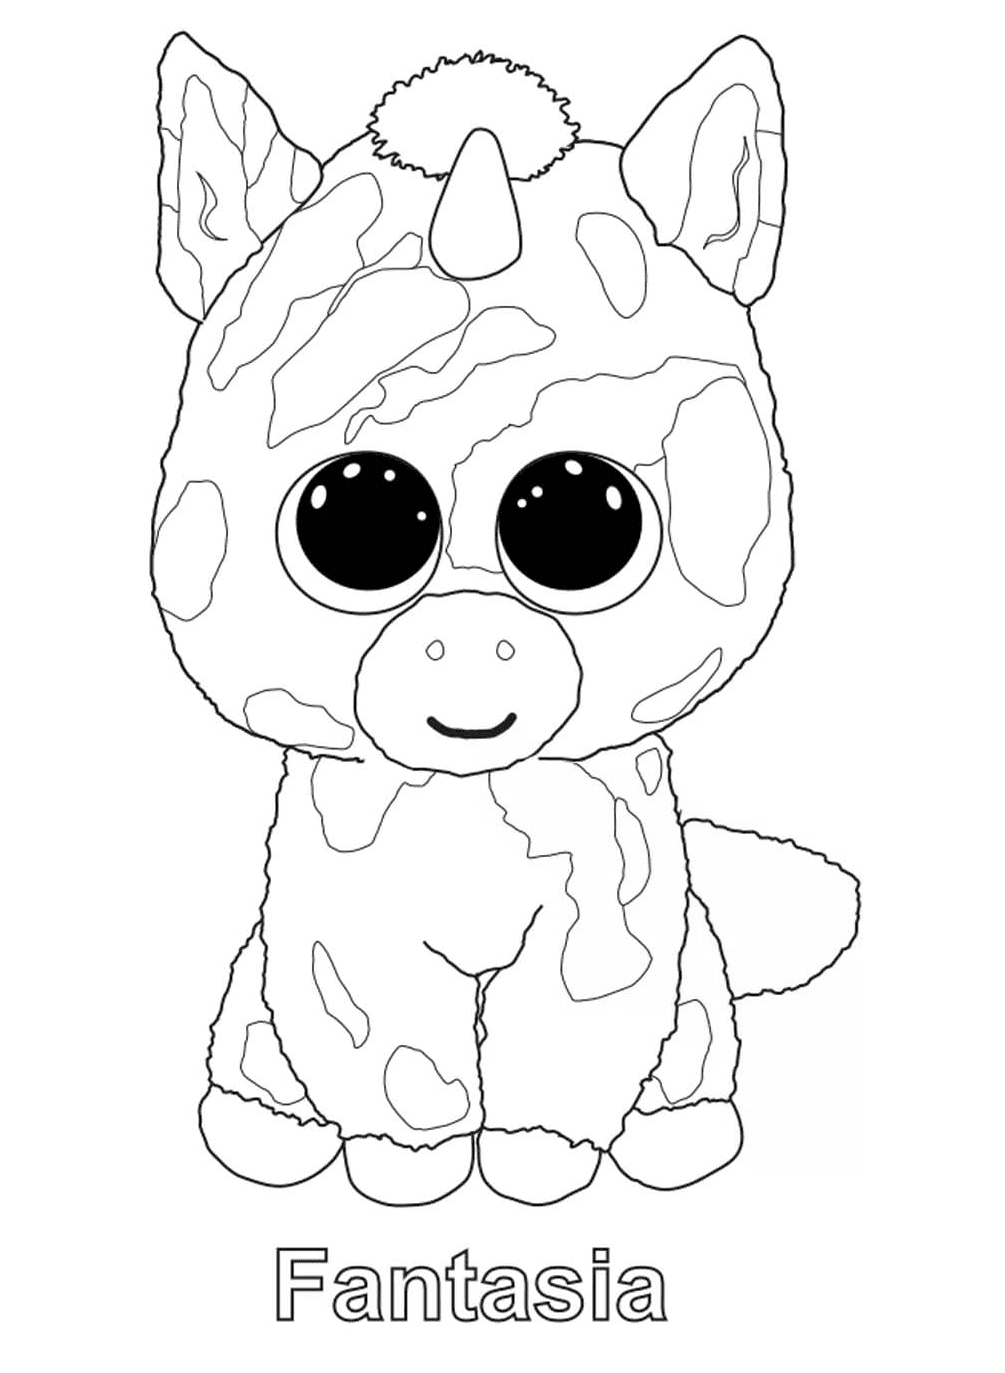 Fantasia Beanie Boos Coloring Pages